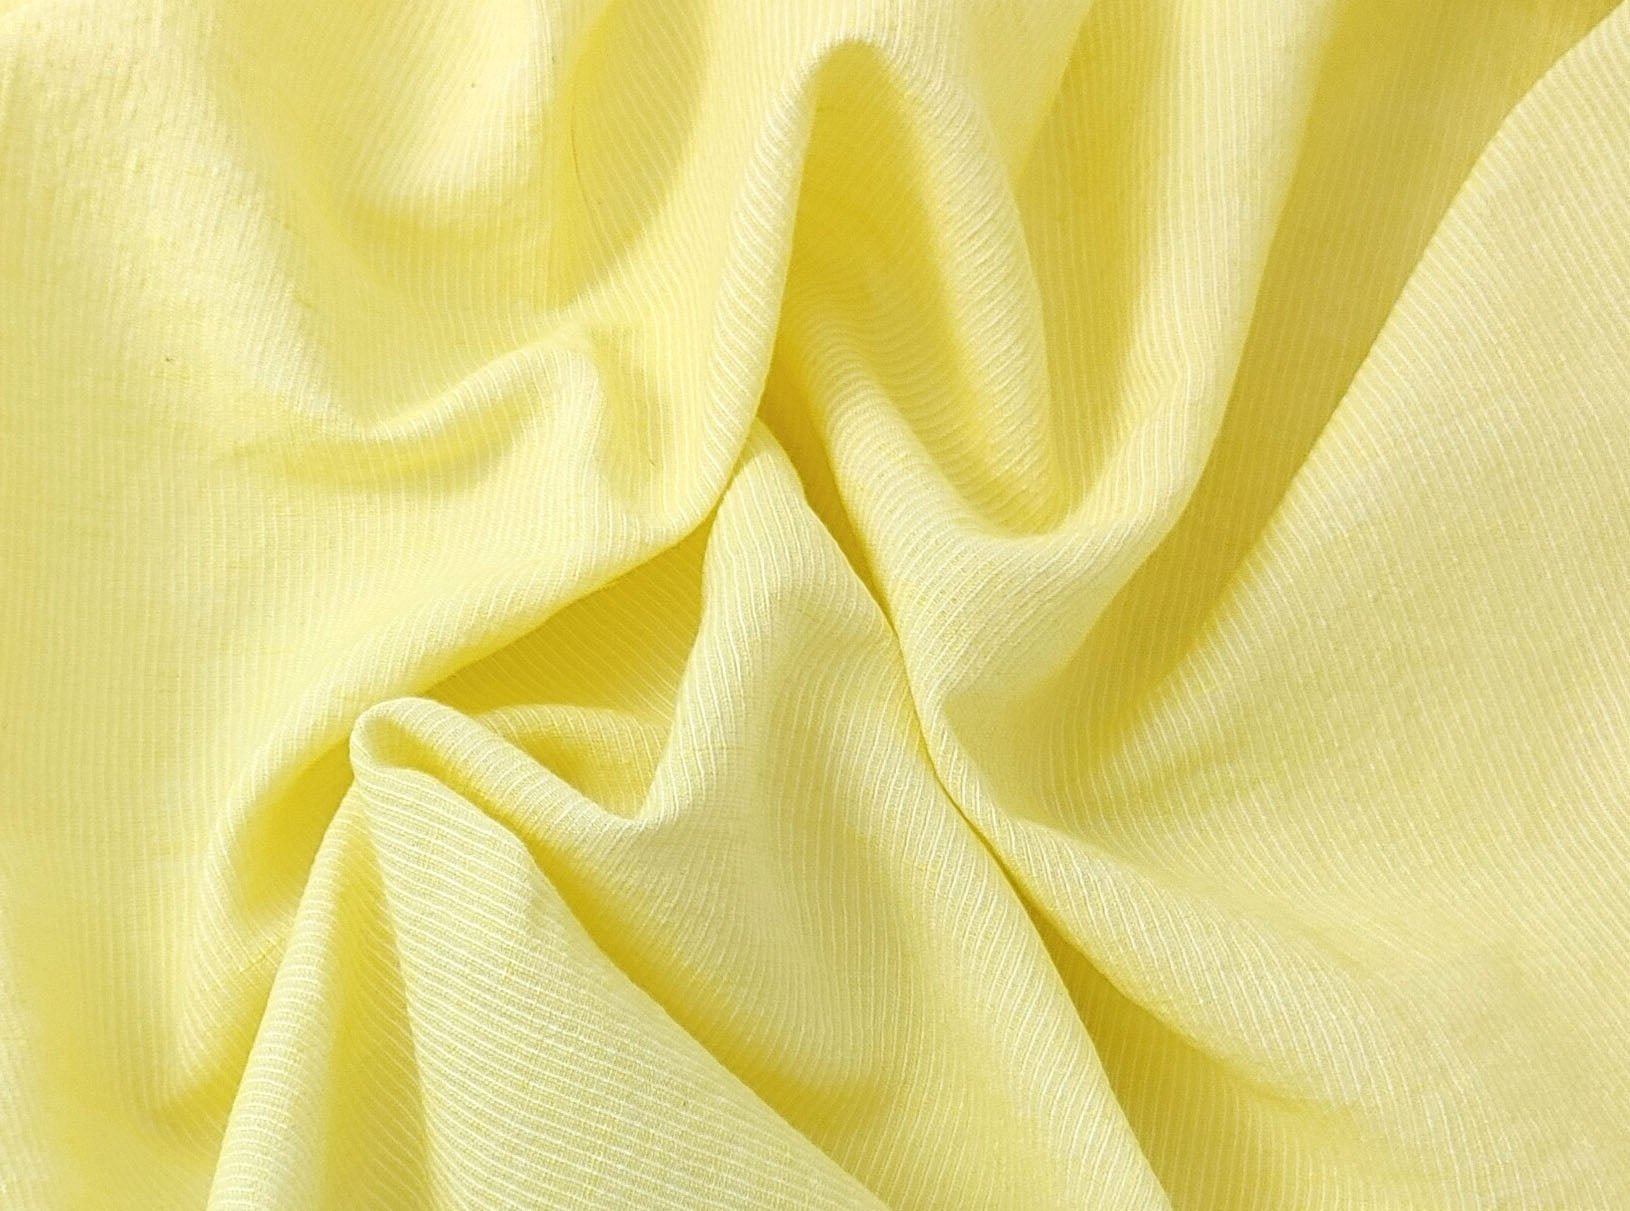 Light Weight Linen Cotton Stripe Fabric with Subtle Wrinkle Effect 7790 7791 7792 7793 7794 - The Linen Lab - Yellow